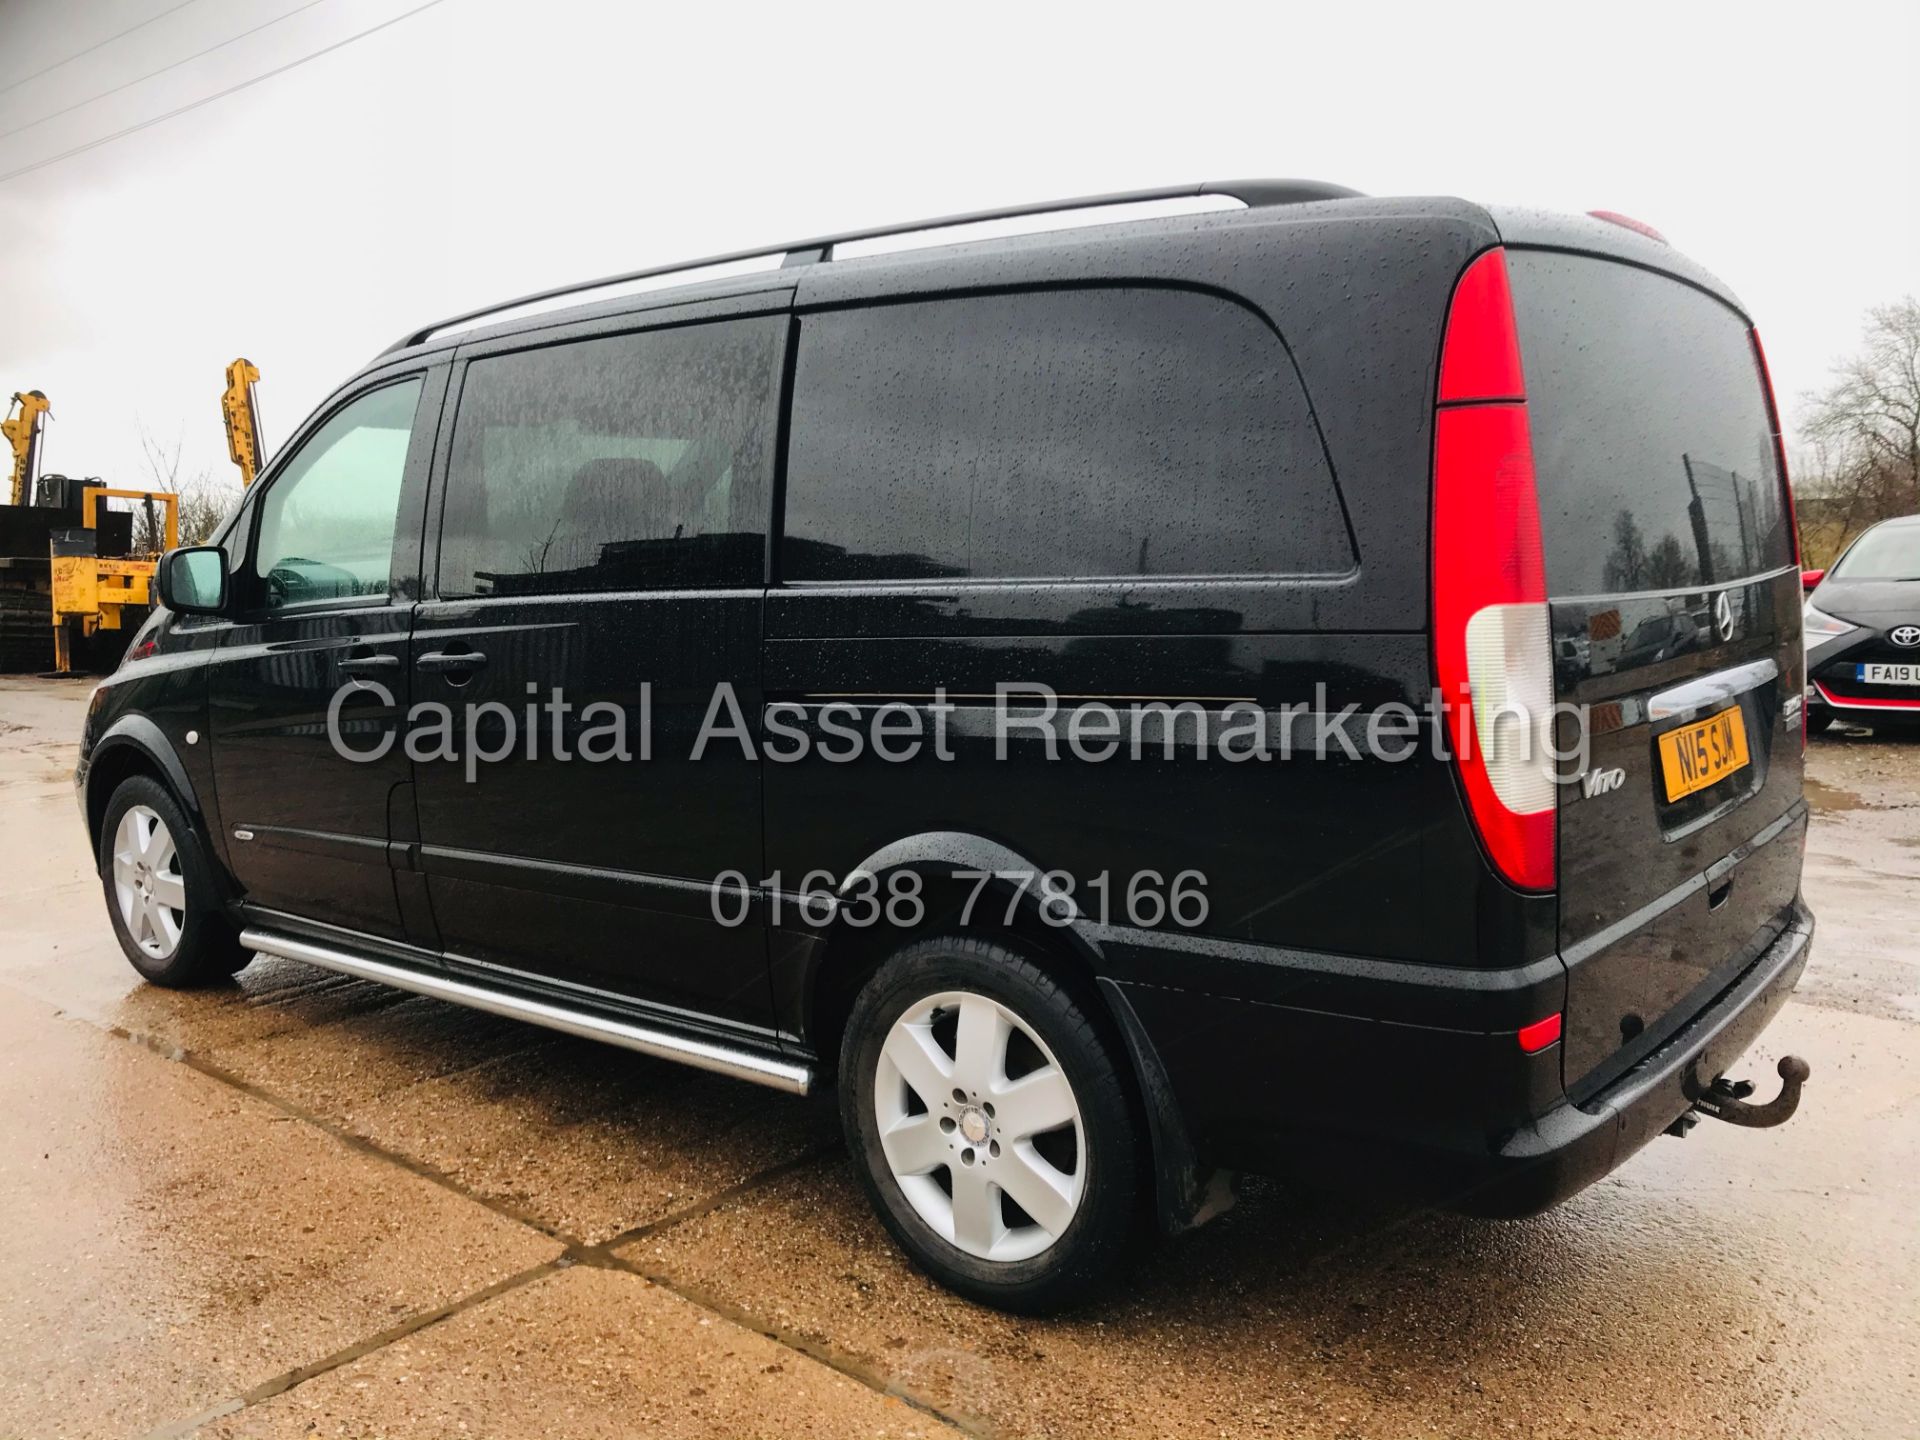 On Sale MERCEDES VITO 116CDI "SPORT"LWB 5 SEATER DUALINER (14 REG) GREAT SPEC *AC* CRUISE - ALLOYS - Image 9 of 23